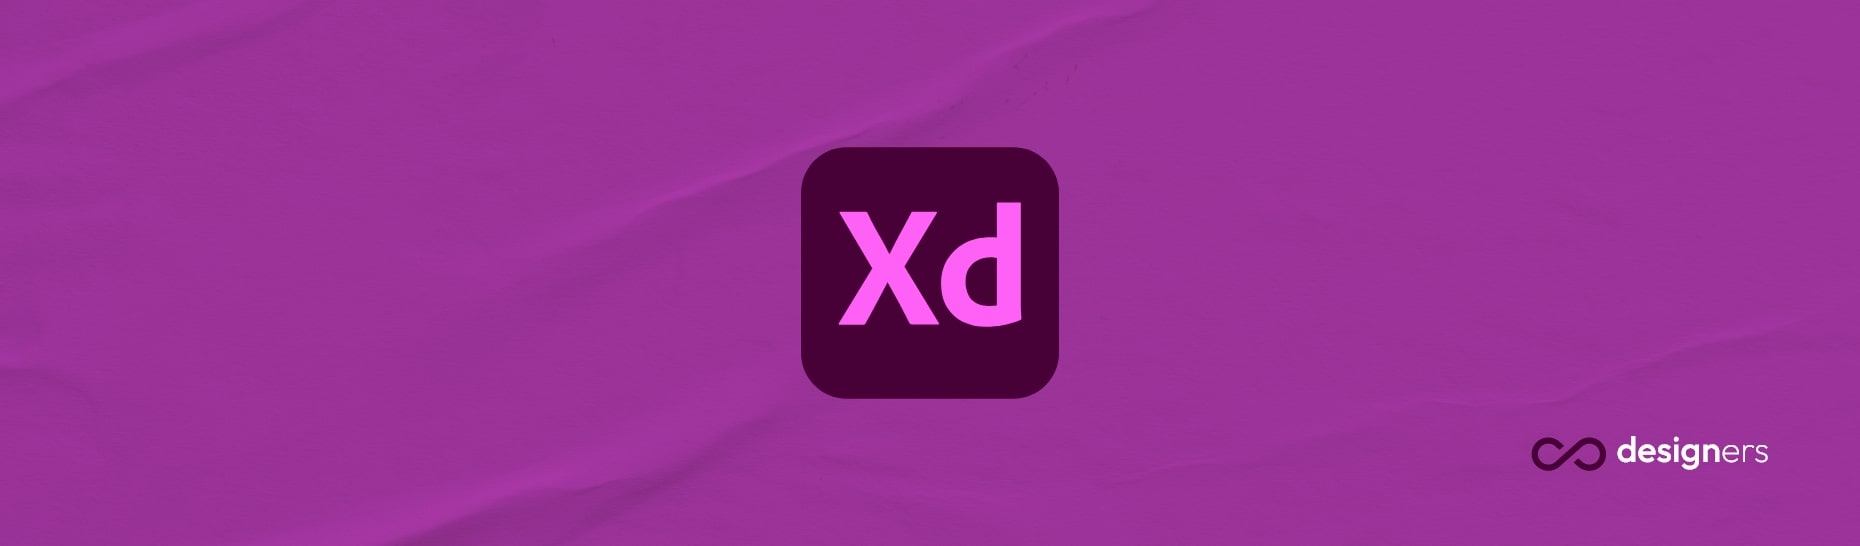 Is Adobe XD a UX design tool?